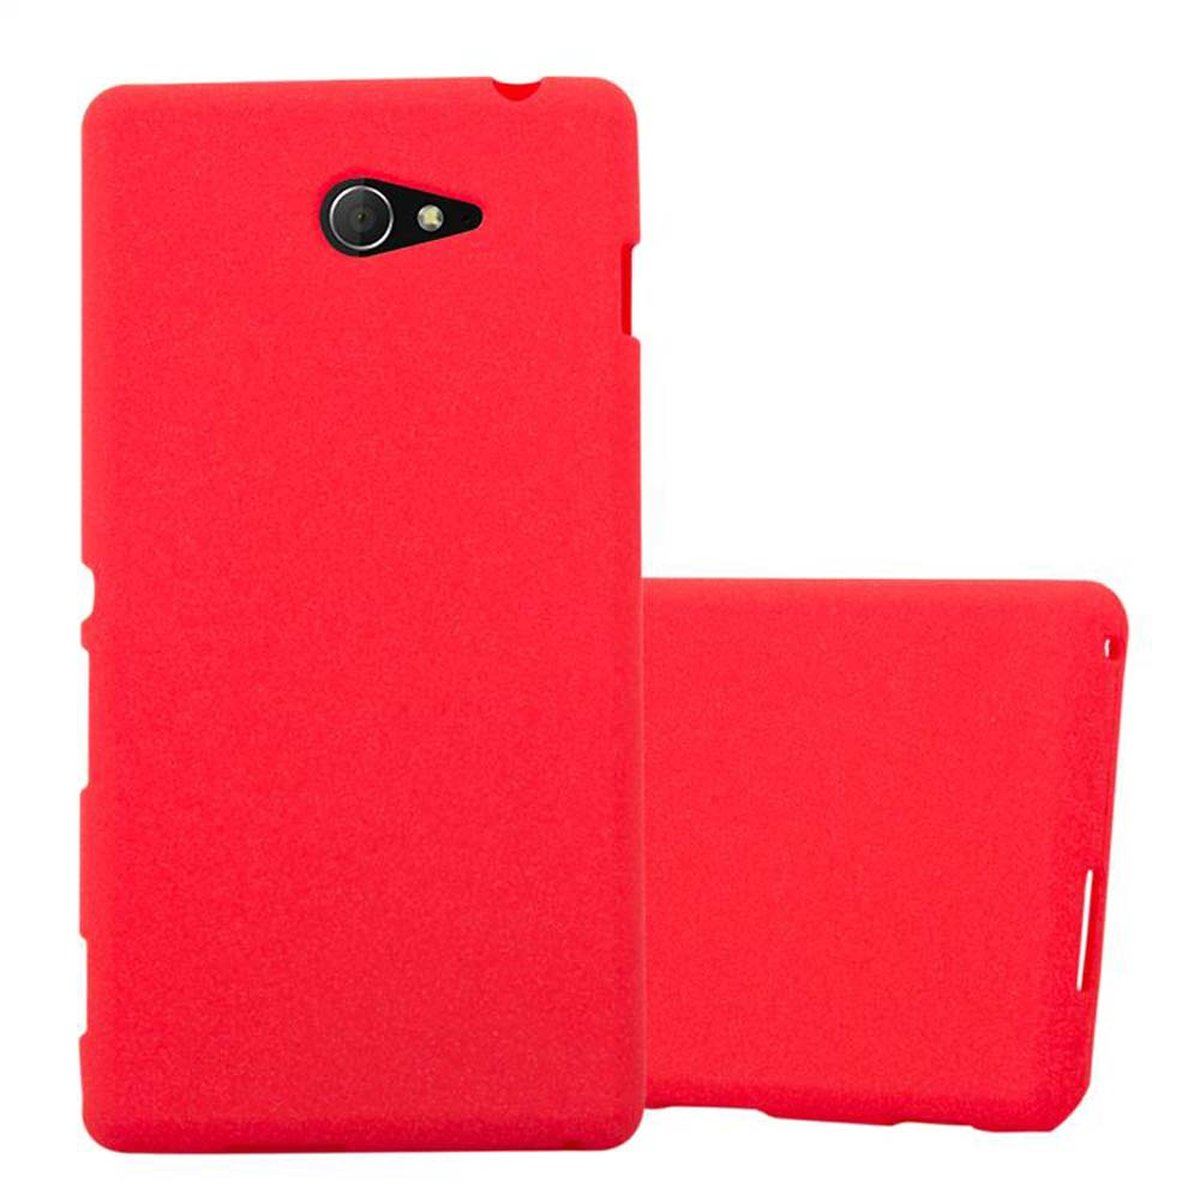 CADORABO Backcover, ROT Sony, Schutzhülle, Xperia FROST M2 AQUA, M2 / Frosted TPU